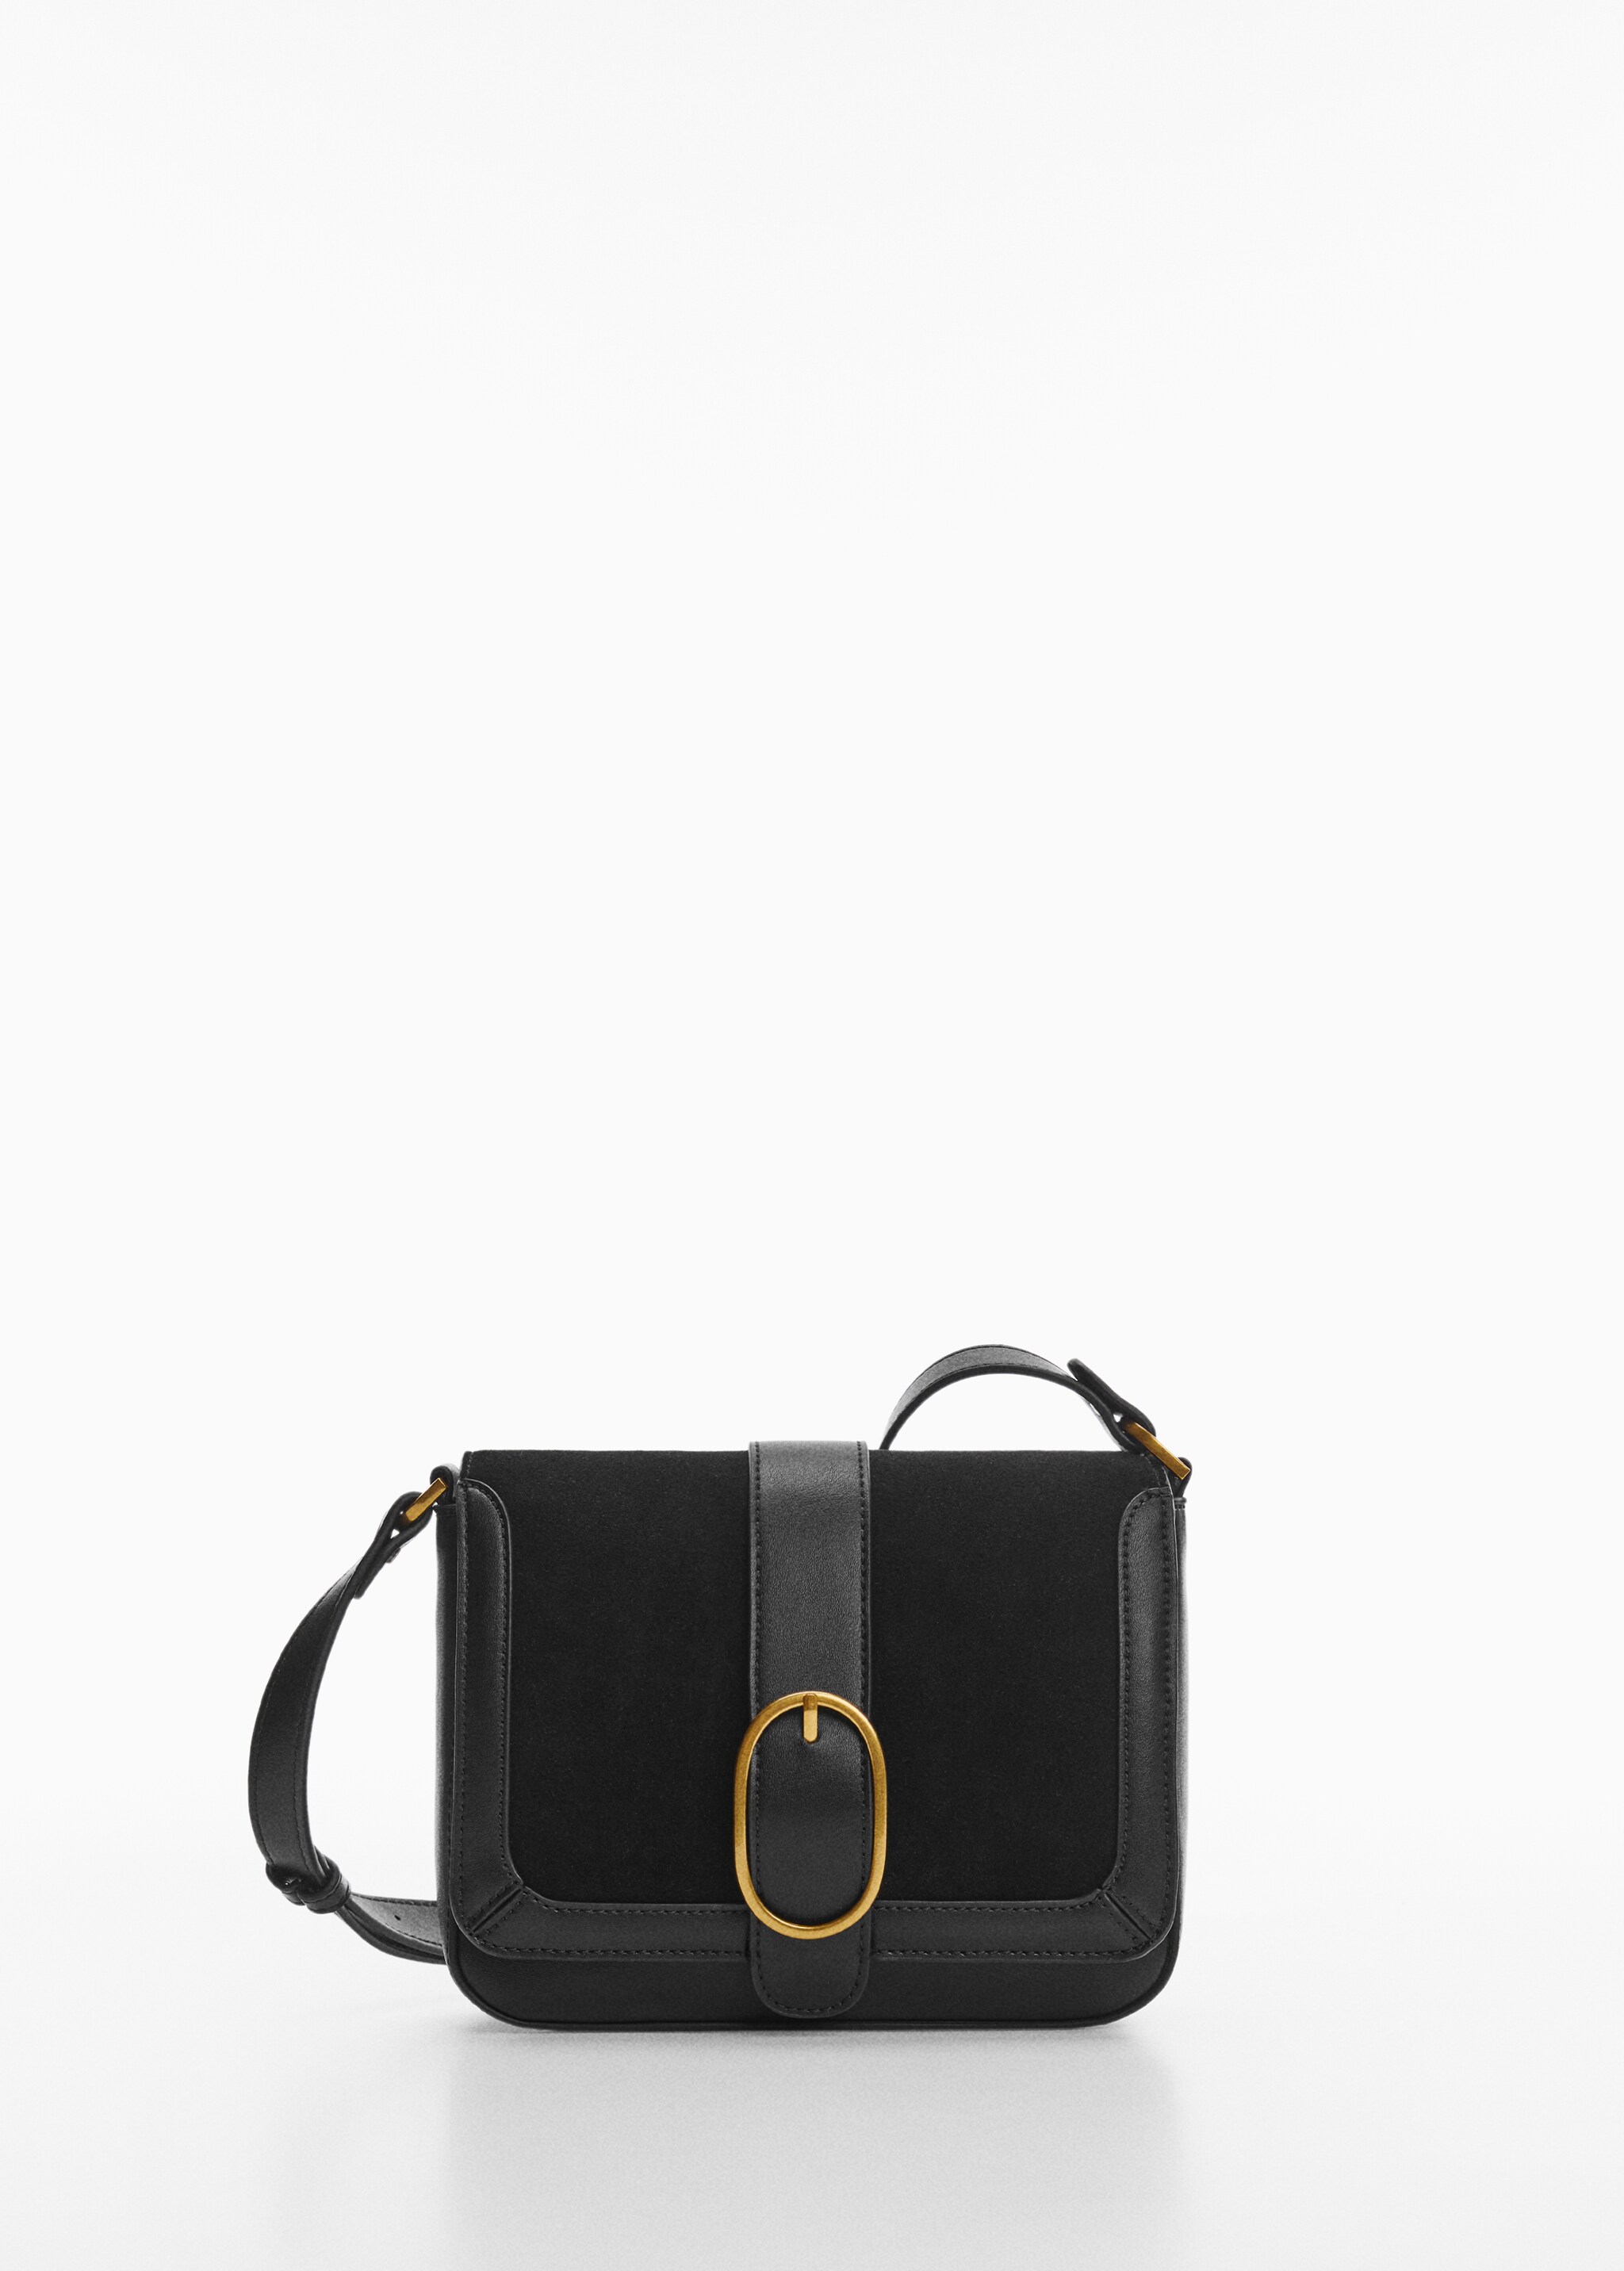 Buckle cross-body bag - Article without model